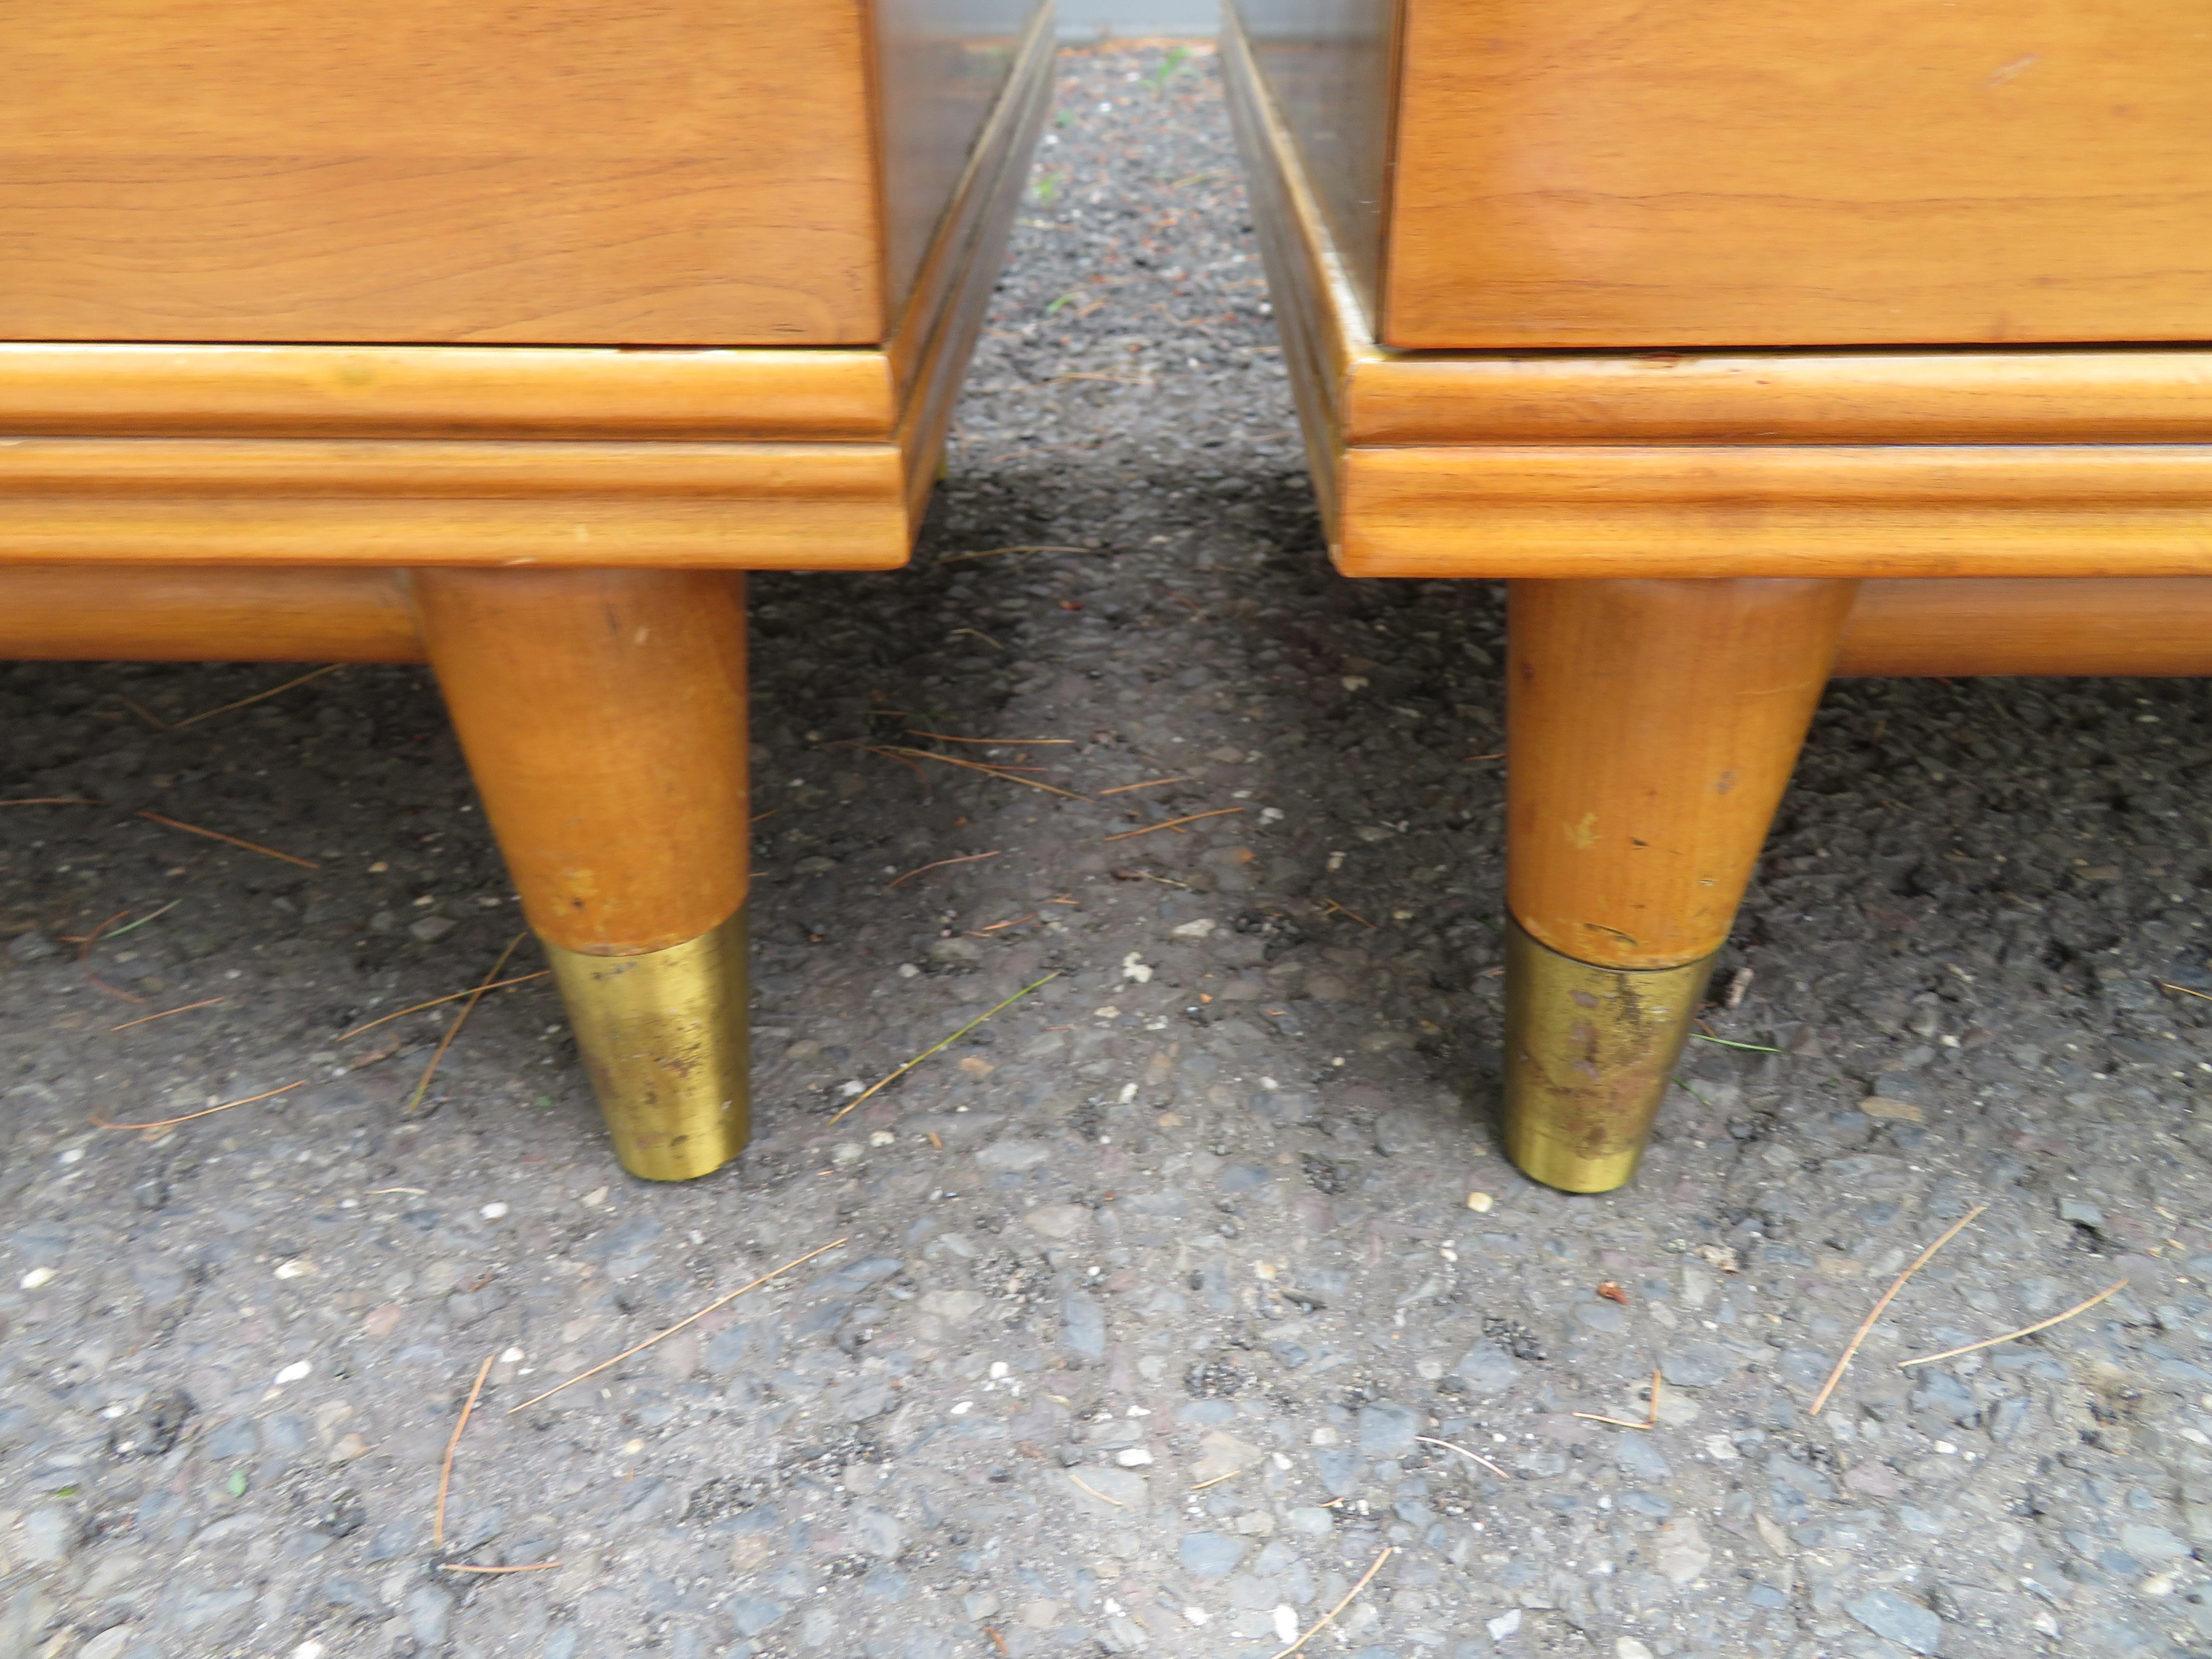 Handsome Pair Asian Style John Widdicomb Bachelors Chests Mid-Century Modern For Sale 1